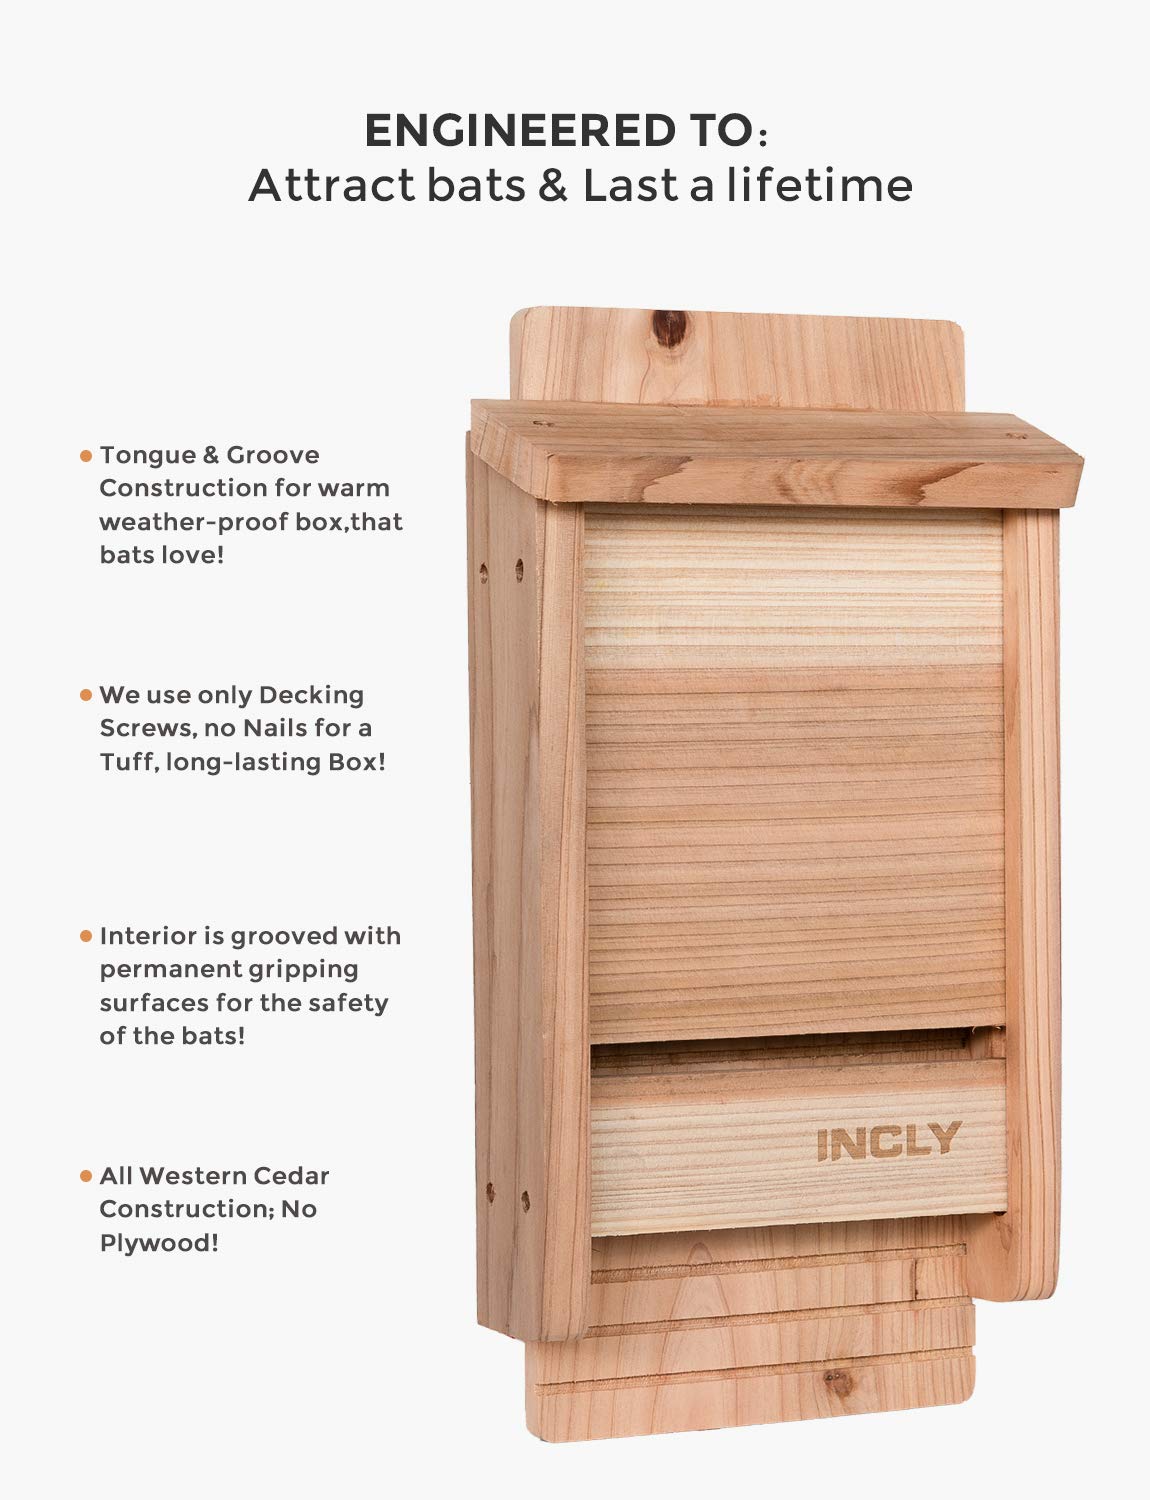 INCLY Small Bat House Kit for Outdoors 14.6"x6.7"x2.2" Shelter Box Roosting Single Chamber Natural Cedar Wood, Pre-Finished Easy to Install